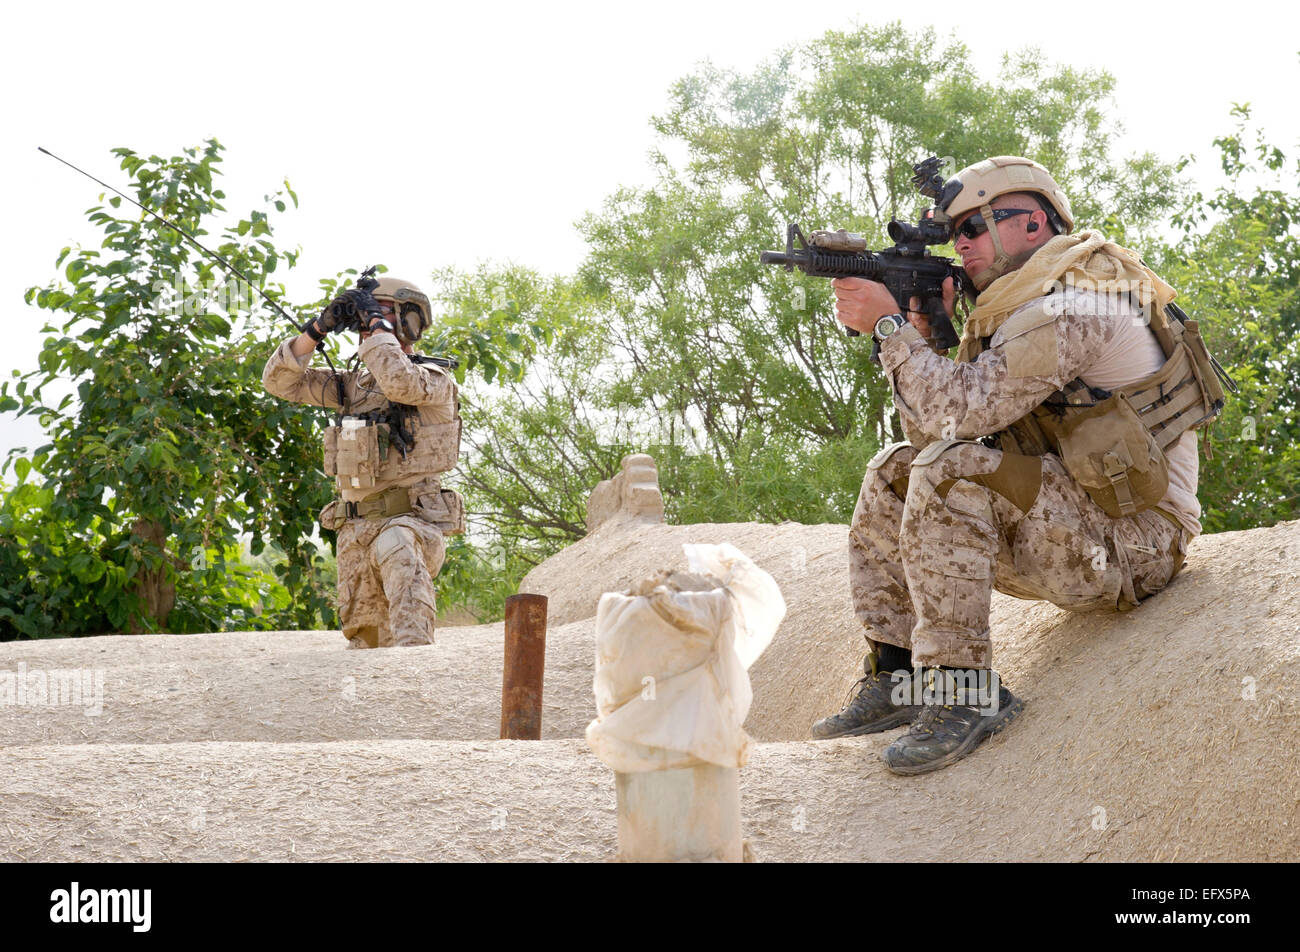 US special forces commandos keep watch for Taliban insurgents during a village clearing operation May 16, 2012 in Gerandai village, Panjwai district, Kandahar province, Afghanistan. Stock Photo